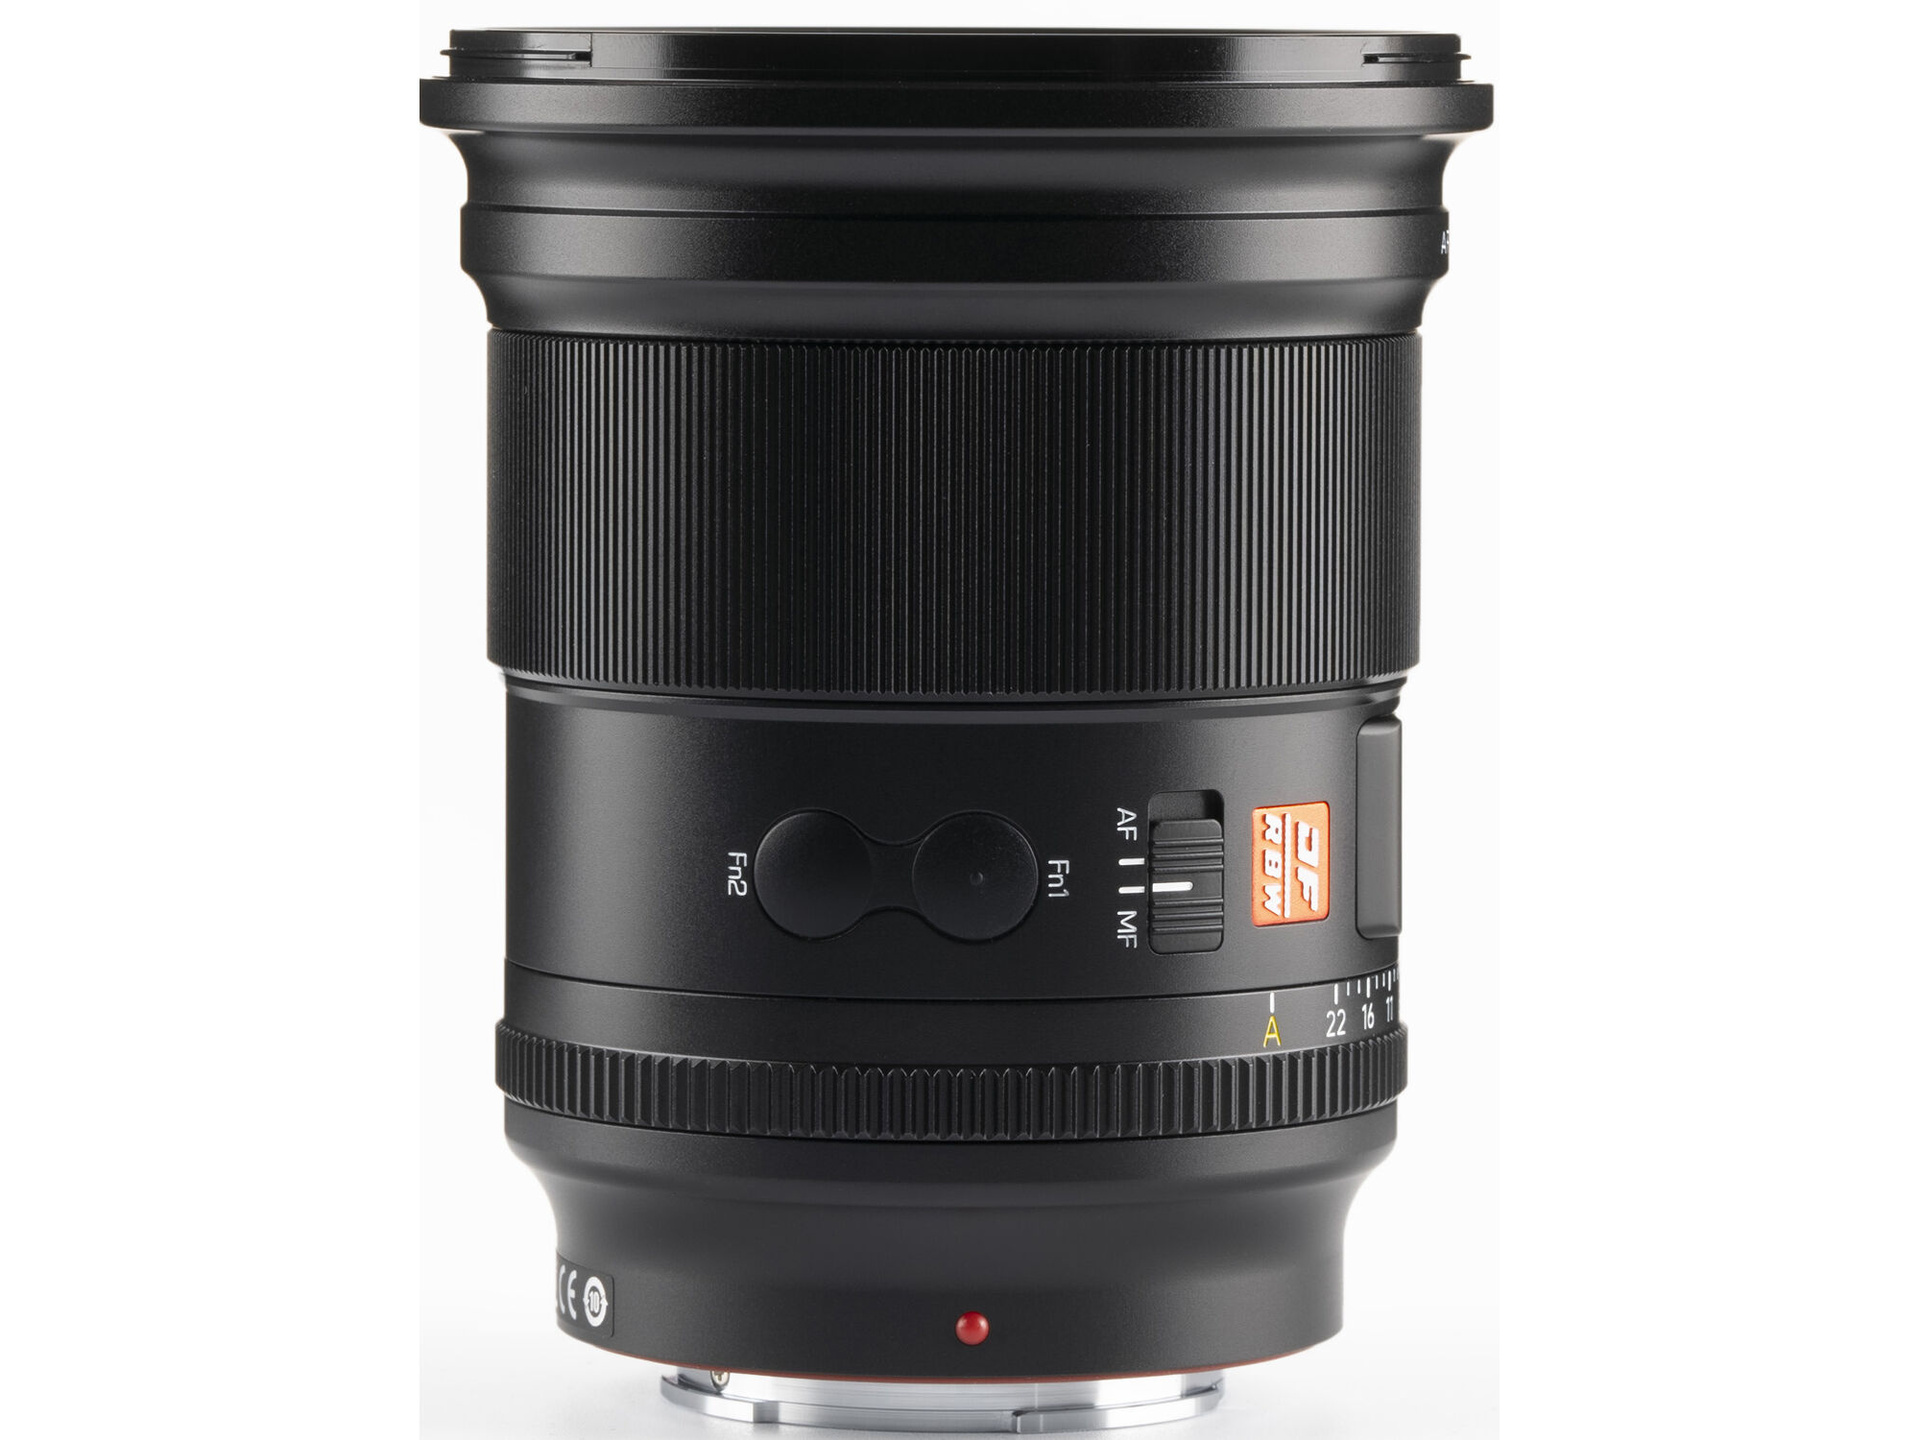 Viltrox Announces a 16mm f/1.8 Sony Lens with LCD Screen - Exibart Street